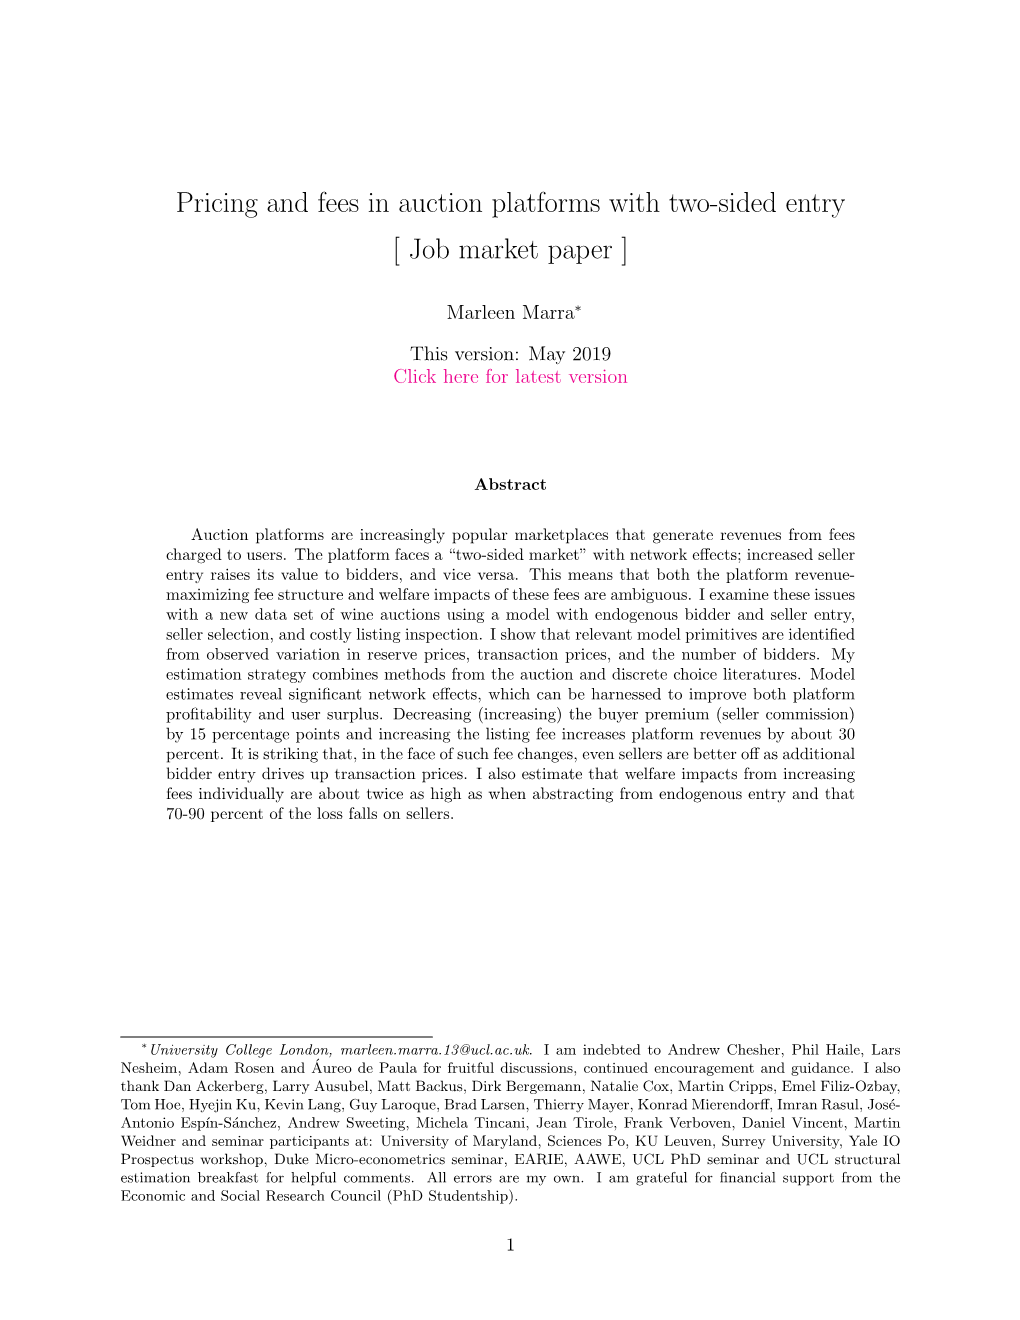 Pricing and Fees in Auction Platforms with Two-Sided Entry [ Job Market Paper ]